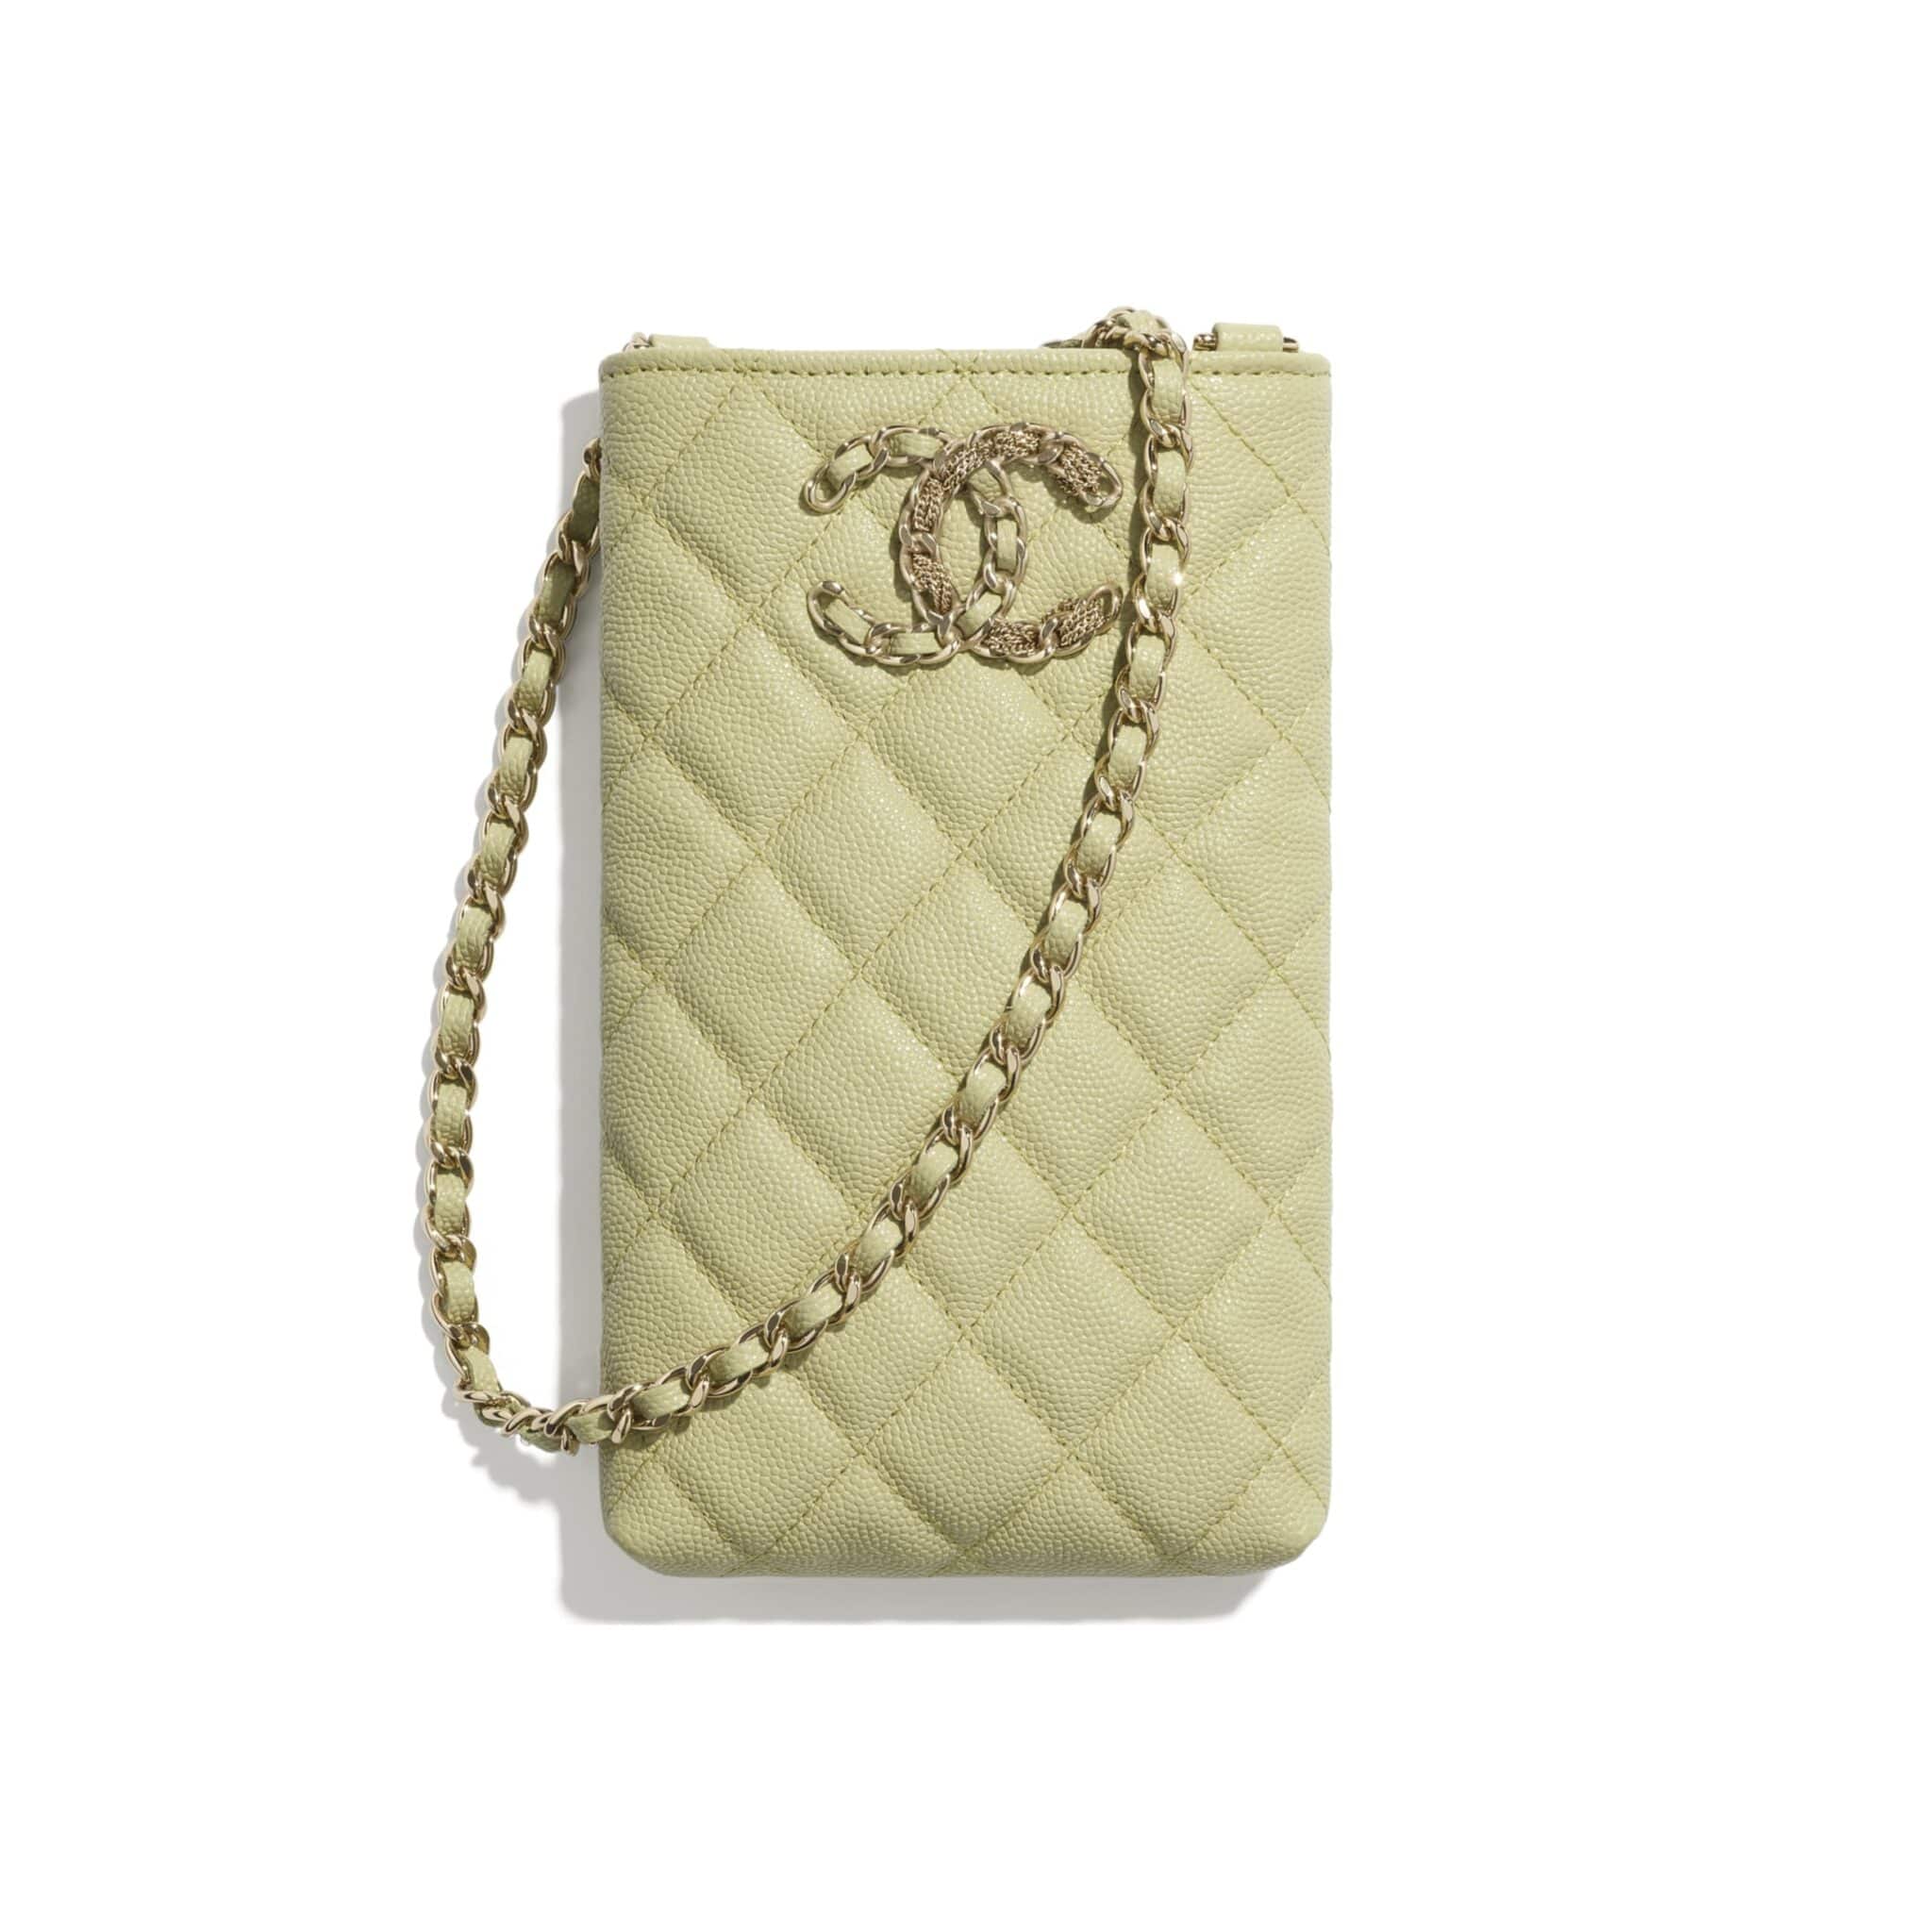 Chanel 19 Phone holder with Chain